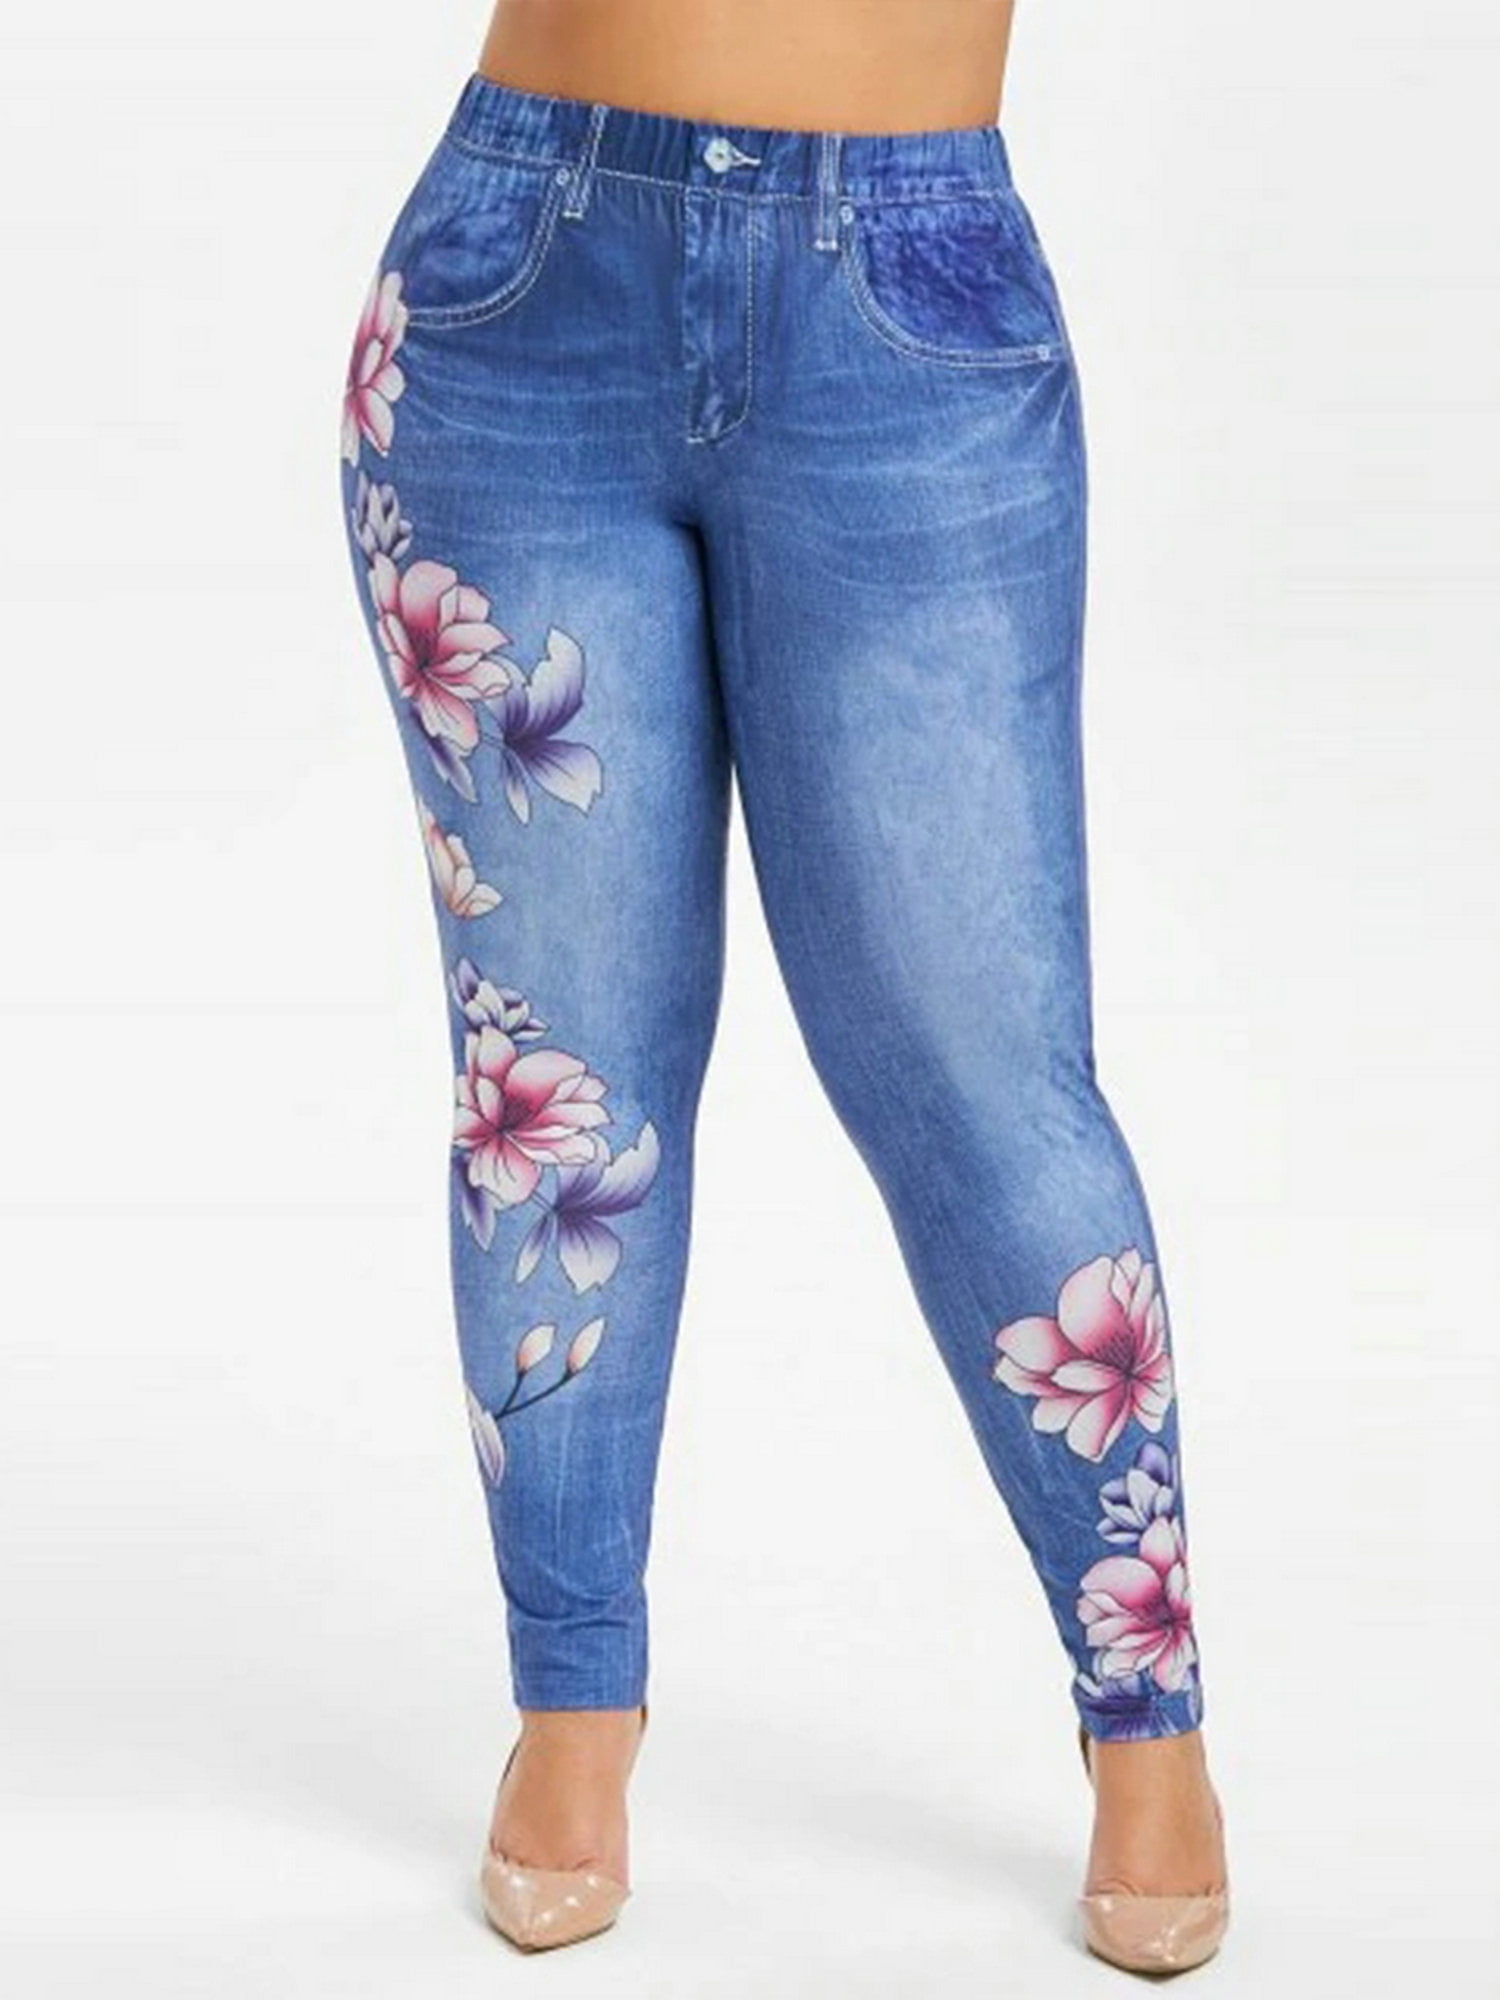 Women’s Plus Size Faded Glory Floral Jeggings Size 3X